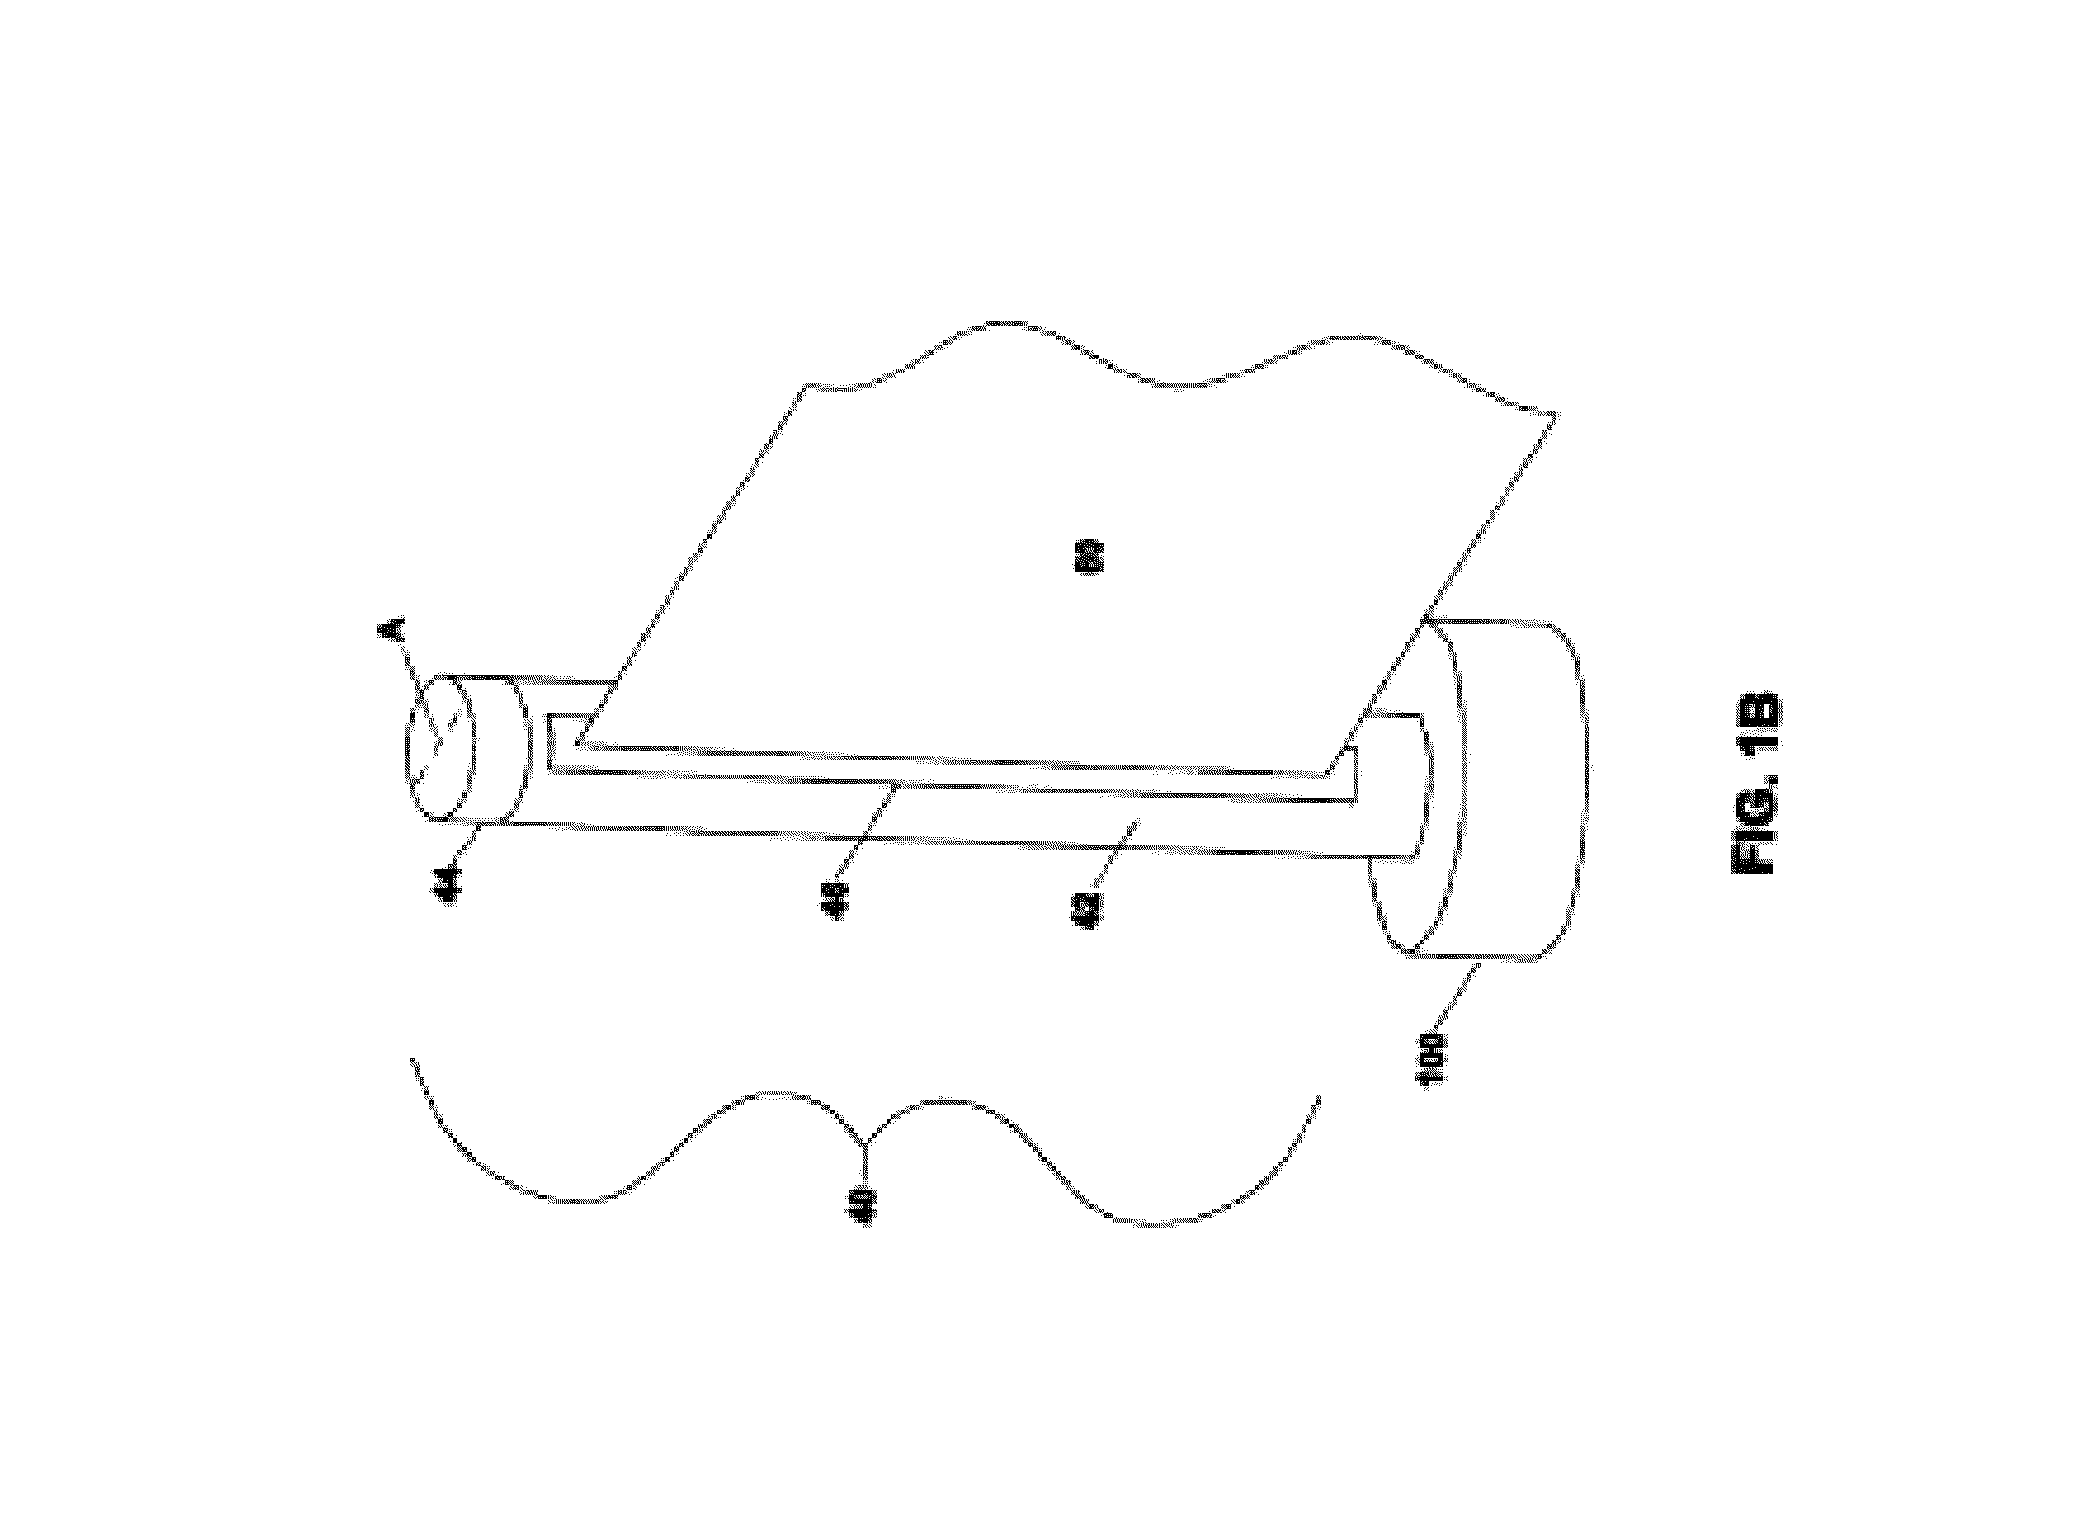 Landscape safety apparatus, associated combinations, methods, and kits